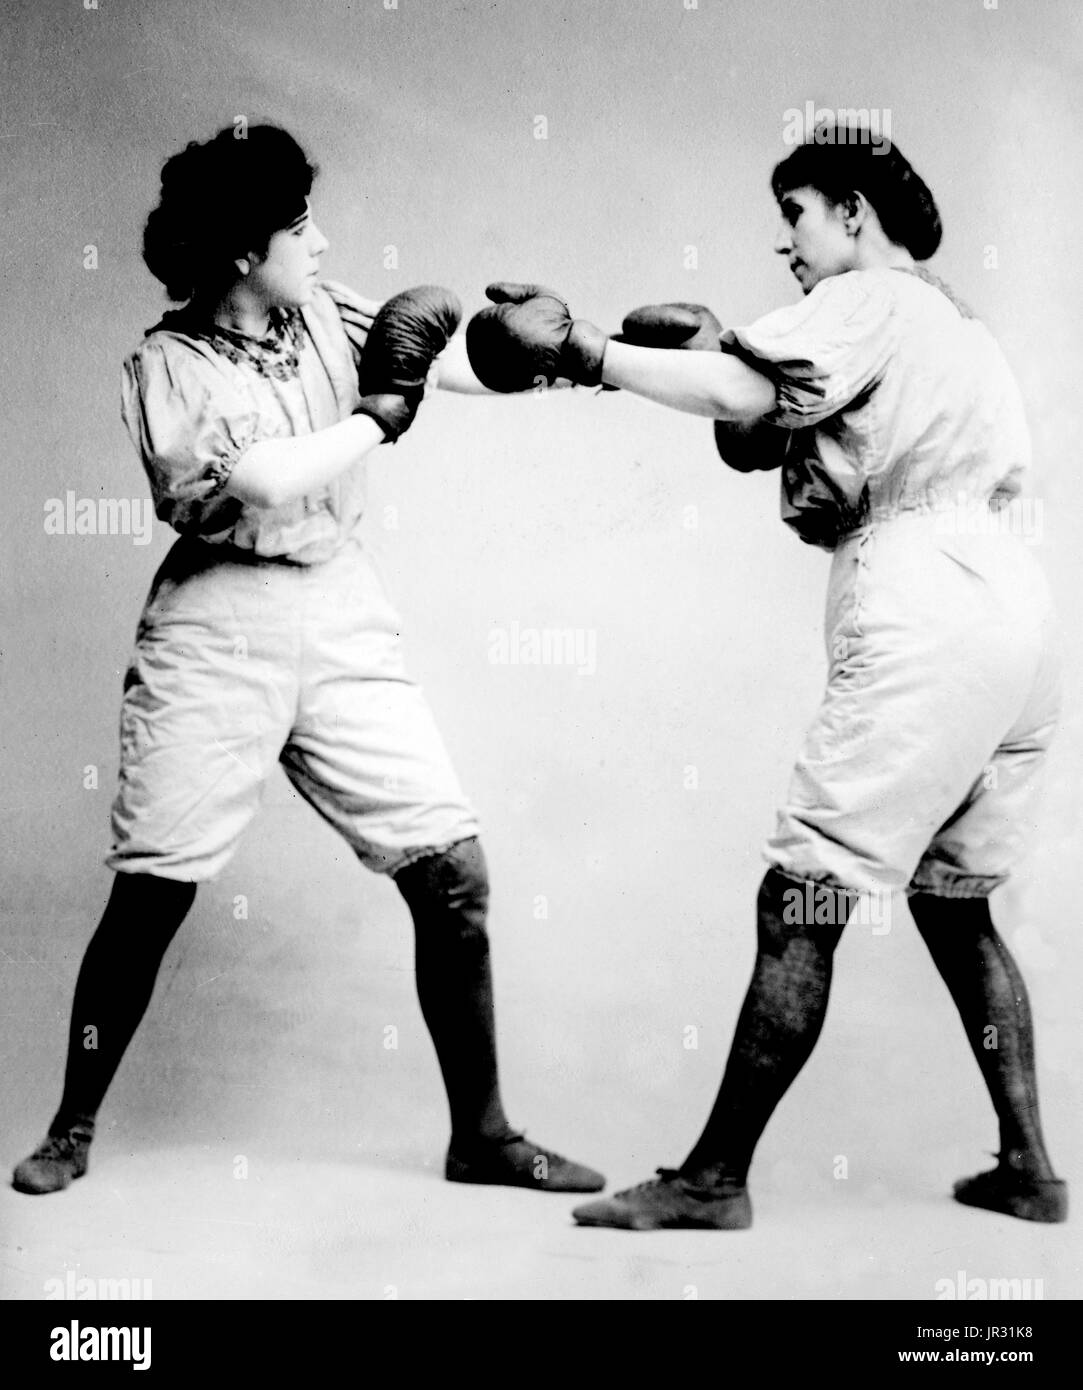 The Bennett Sisters were not amateur or professional boxers, but a vaudeville act, that traveled the country, displaying their talent, between 1910 and 1915. While many women took up sport in the Edwardian era, boxing as a vaudeville act became a career for these sisters. Laura Bennett is said to have dominated the sport at the turn of the century. They would also wrestle and sometimes fence each other. Stock Photo